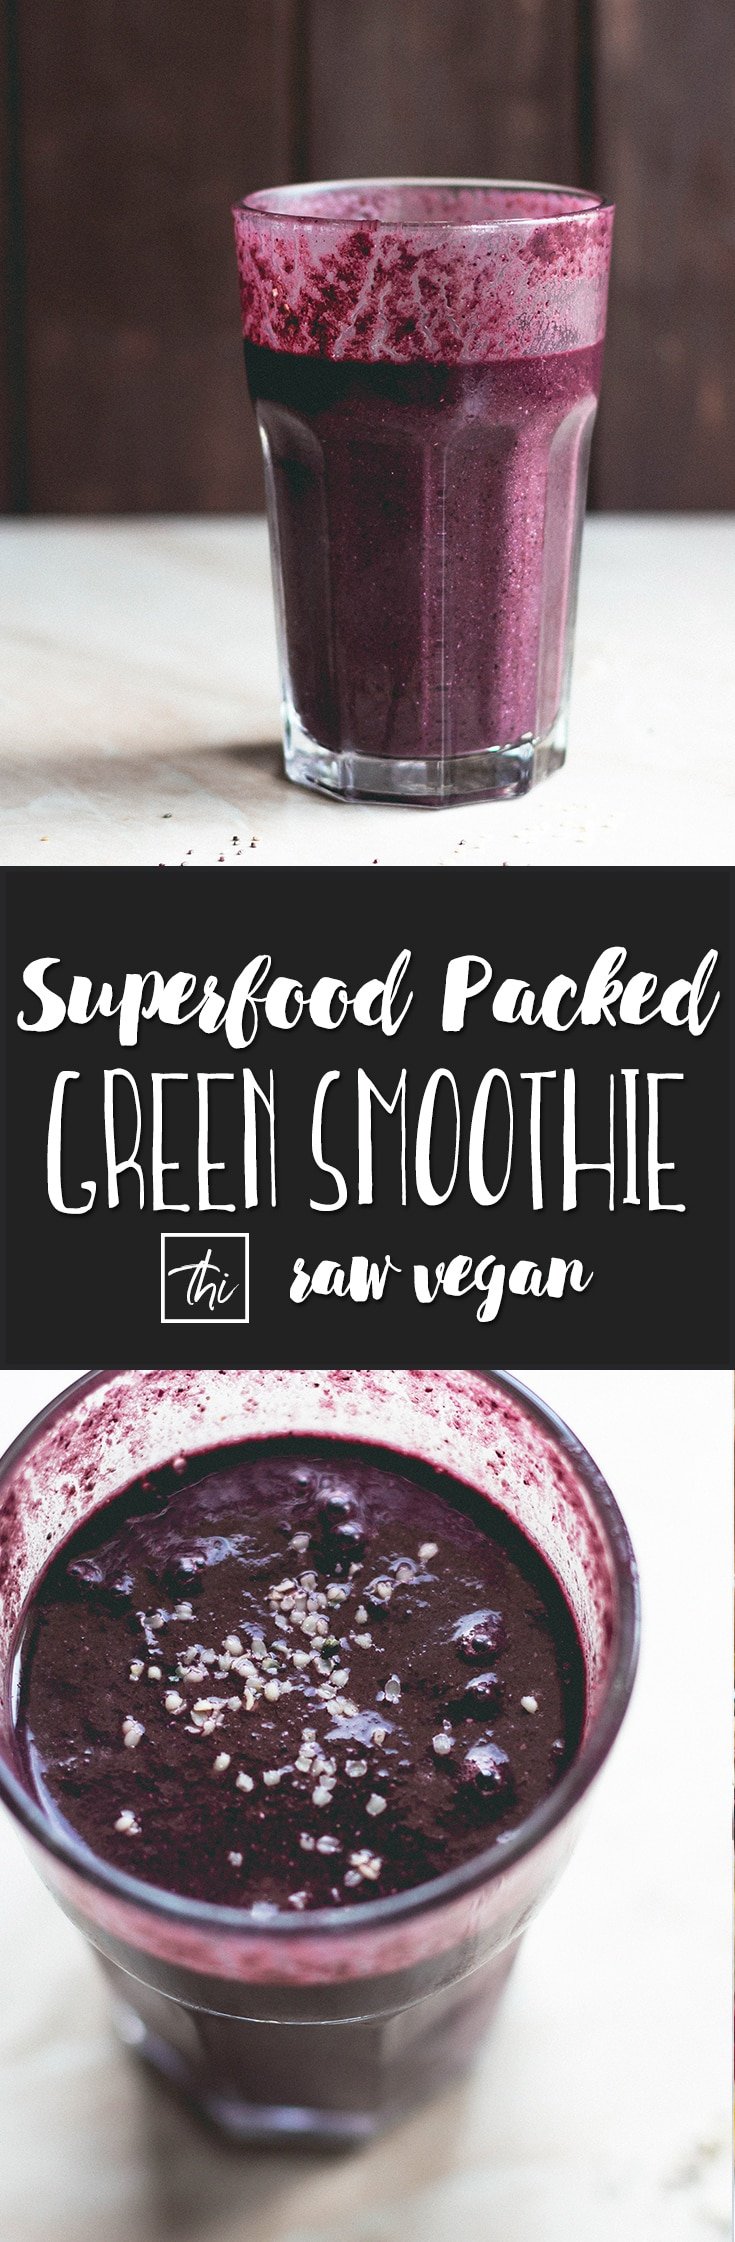 Superfood Packed Green Smoothie - the best green smoothie recipe! Ready in minutes and really nutritious! | thehealthfulideas.com